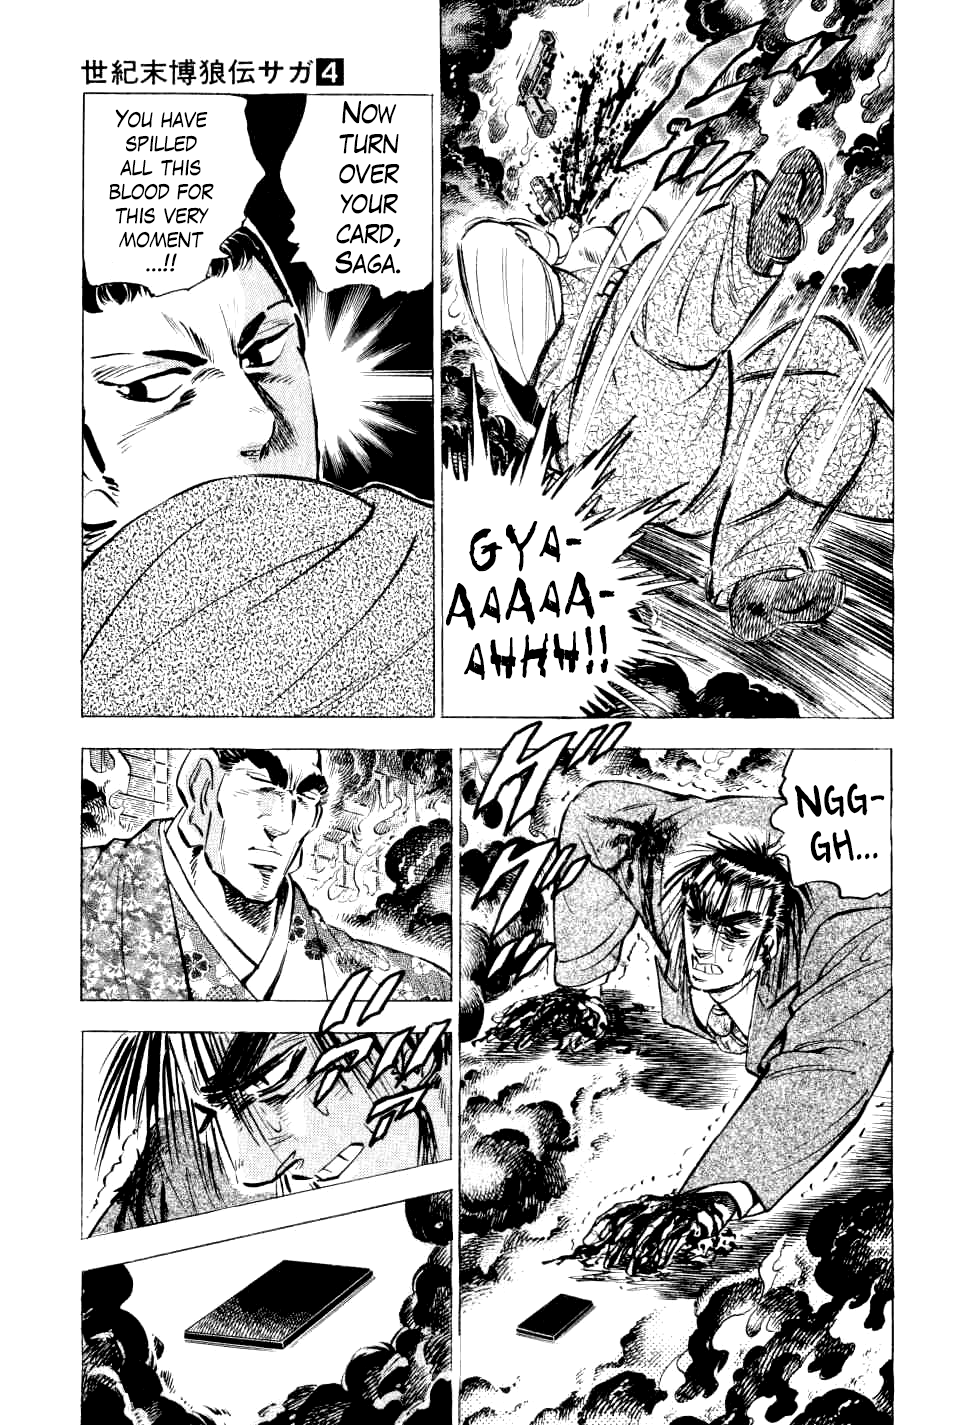 Legend Of The End-Of-Century Gambling Wolf Saga Vol.4 Chapter 28